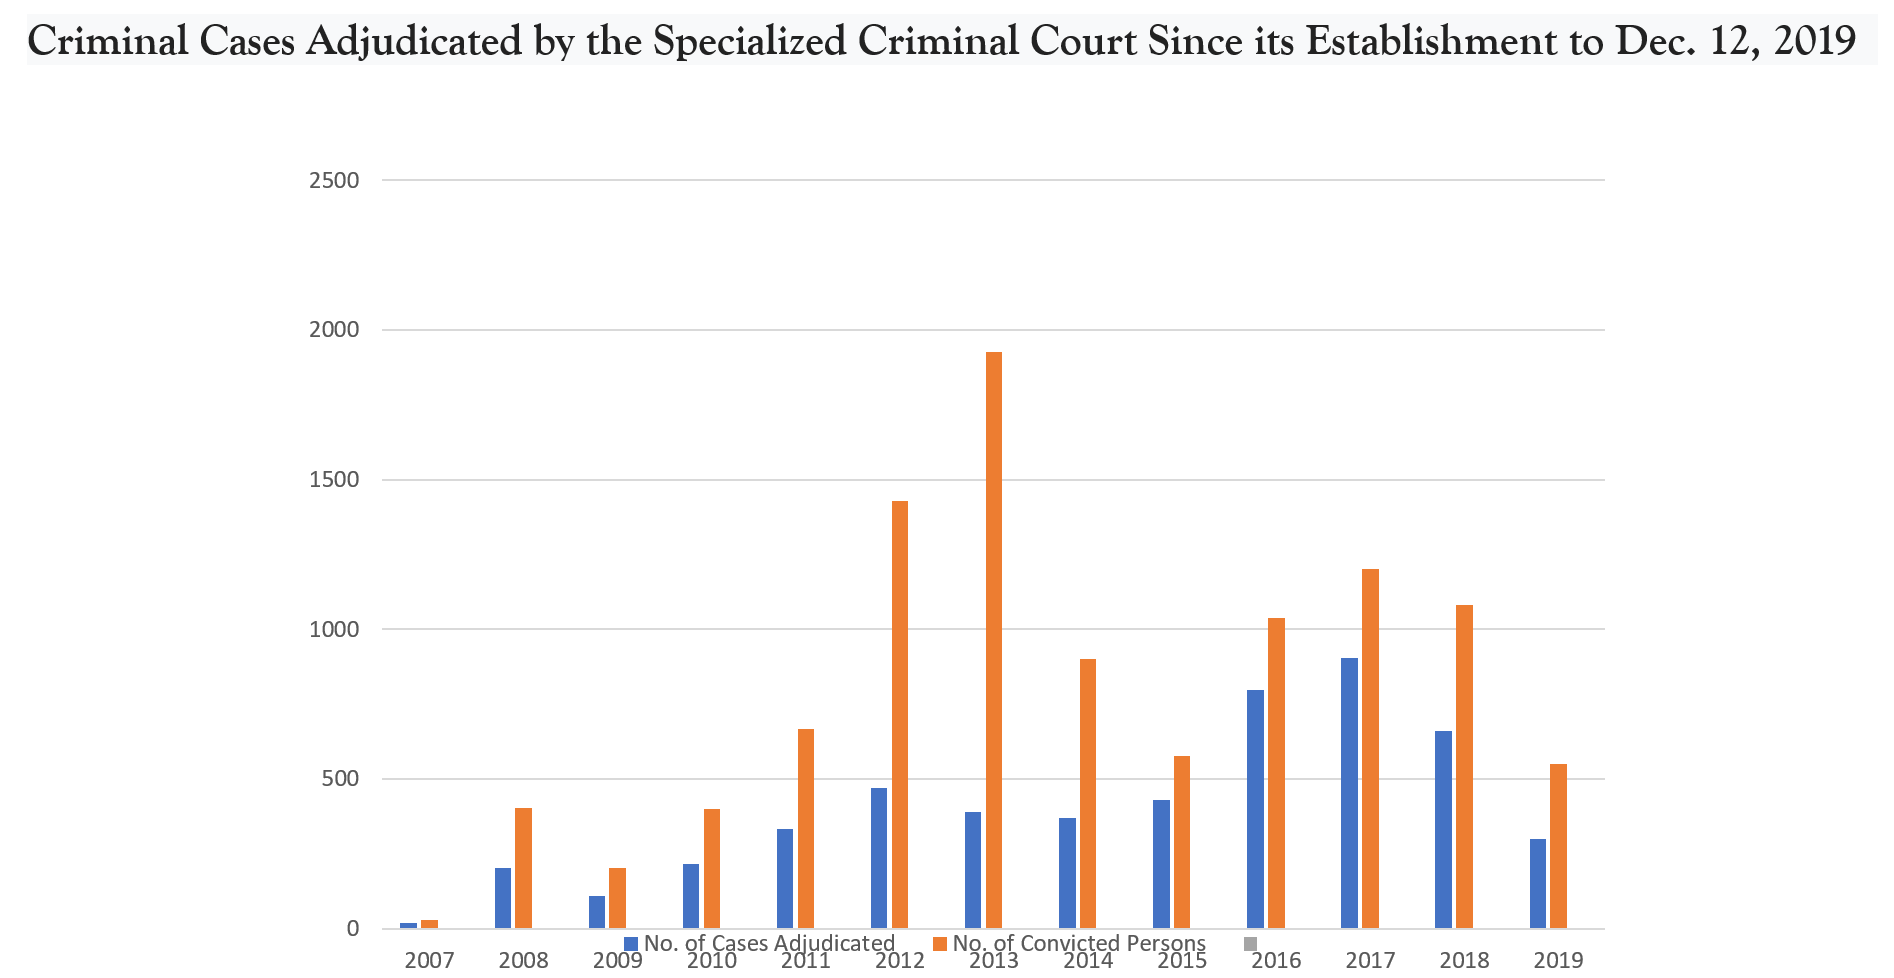 Criminal Cases Adjudicated by the Specialized Criminal Courts 